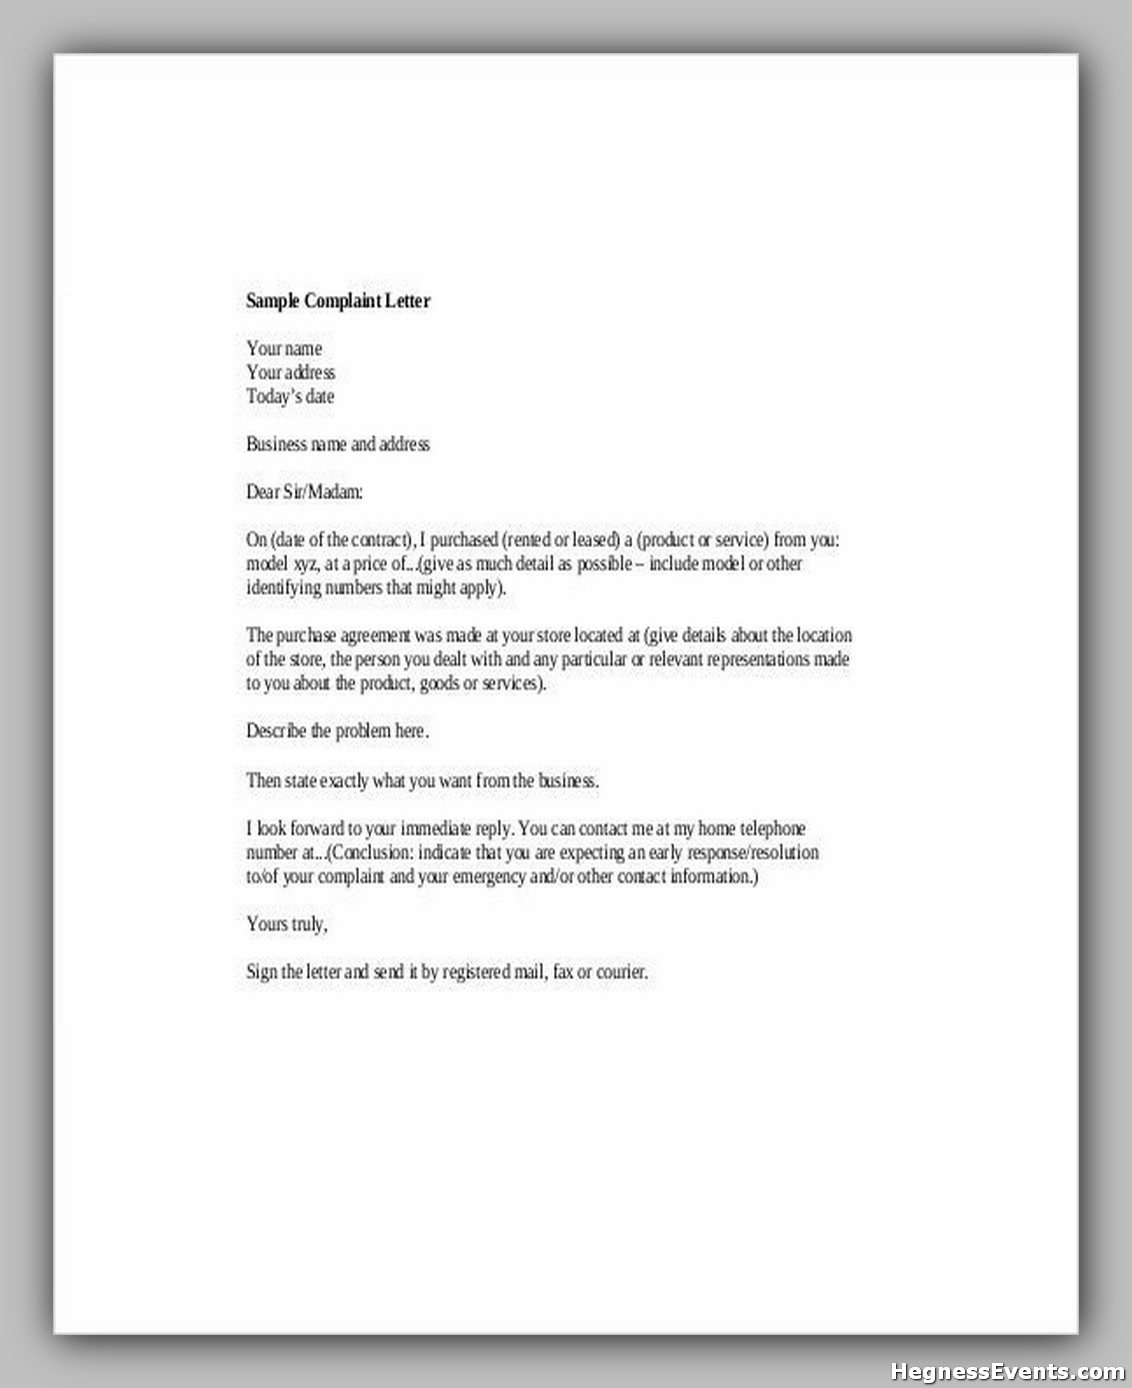 20 Great Consumer Complaint Letter Hennessy Events 4034